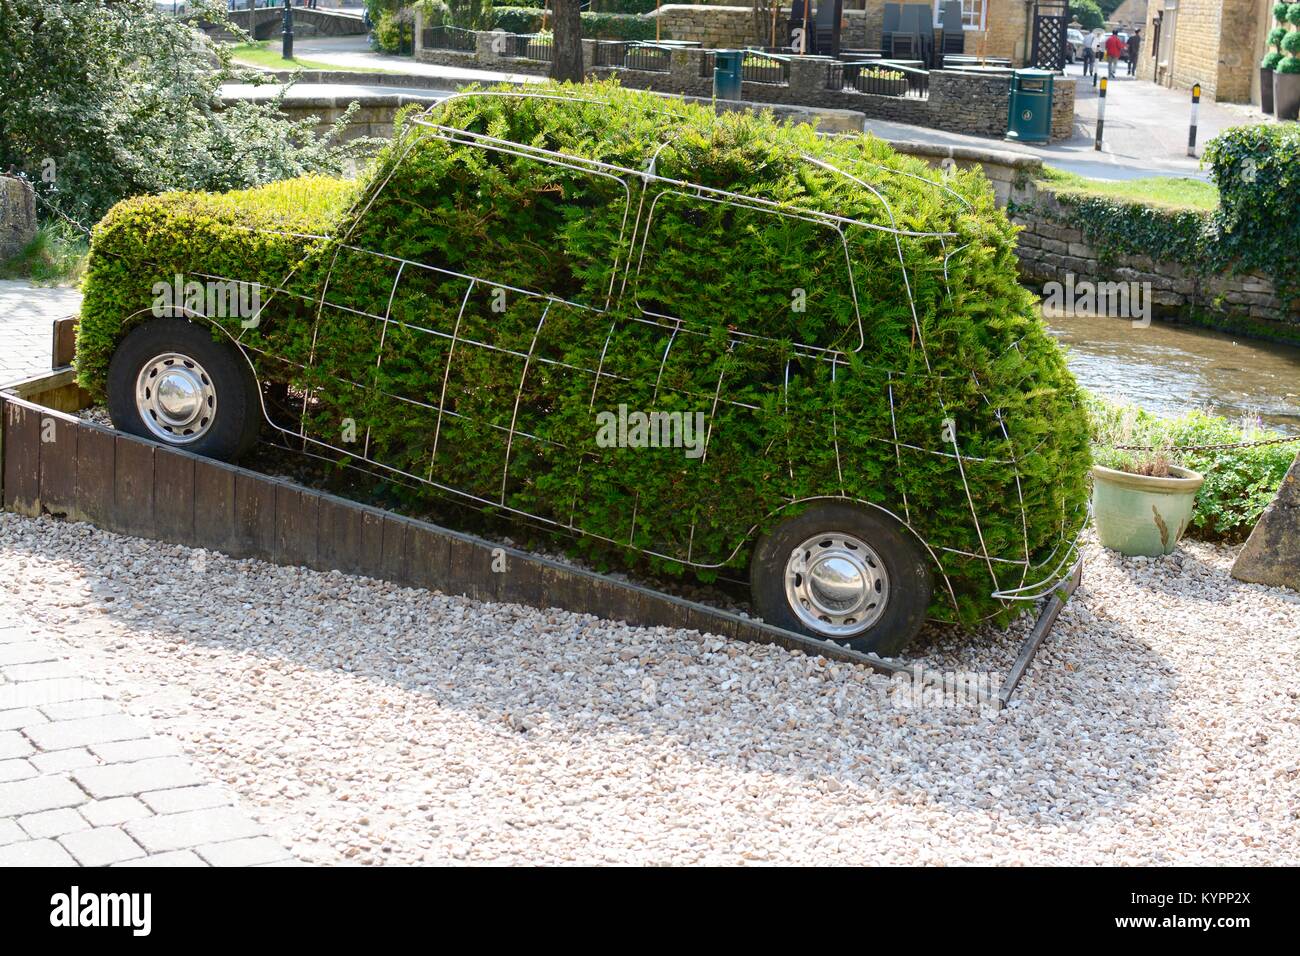 A Mini car shaped topiary bush at the Motoring Museum, Bourton-on-the-Water, Cotswolds, Gloucestershire, England Stock Photo